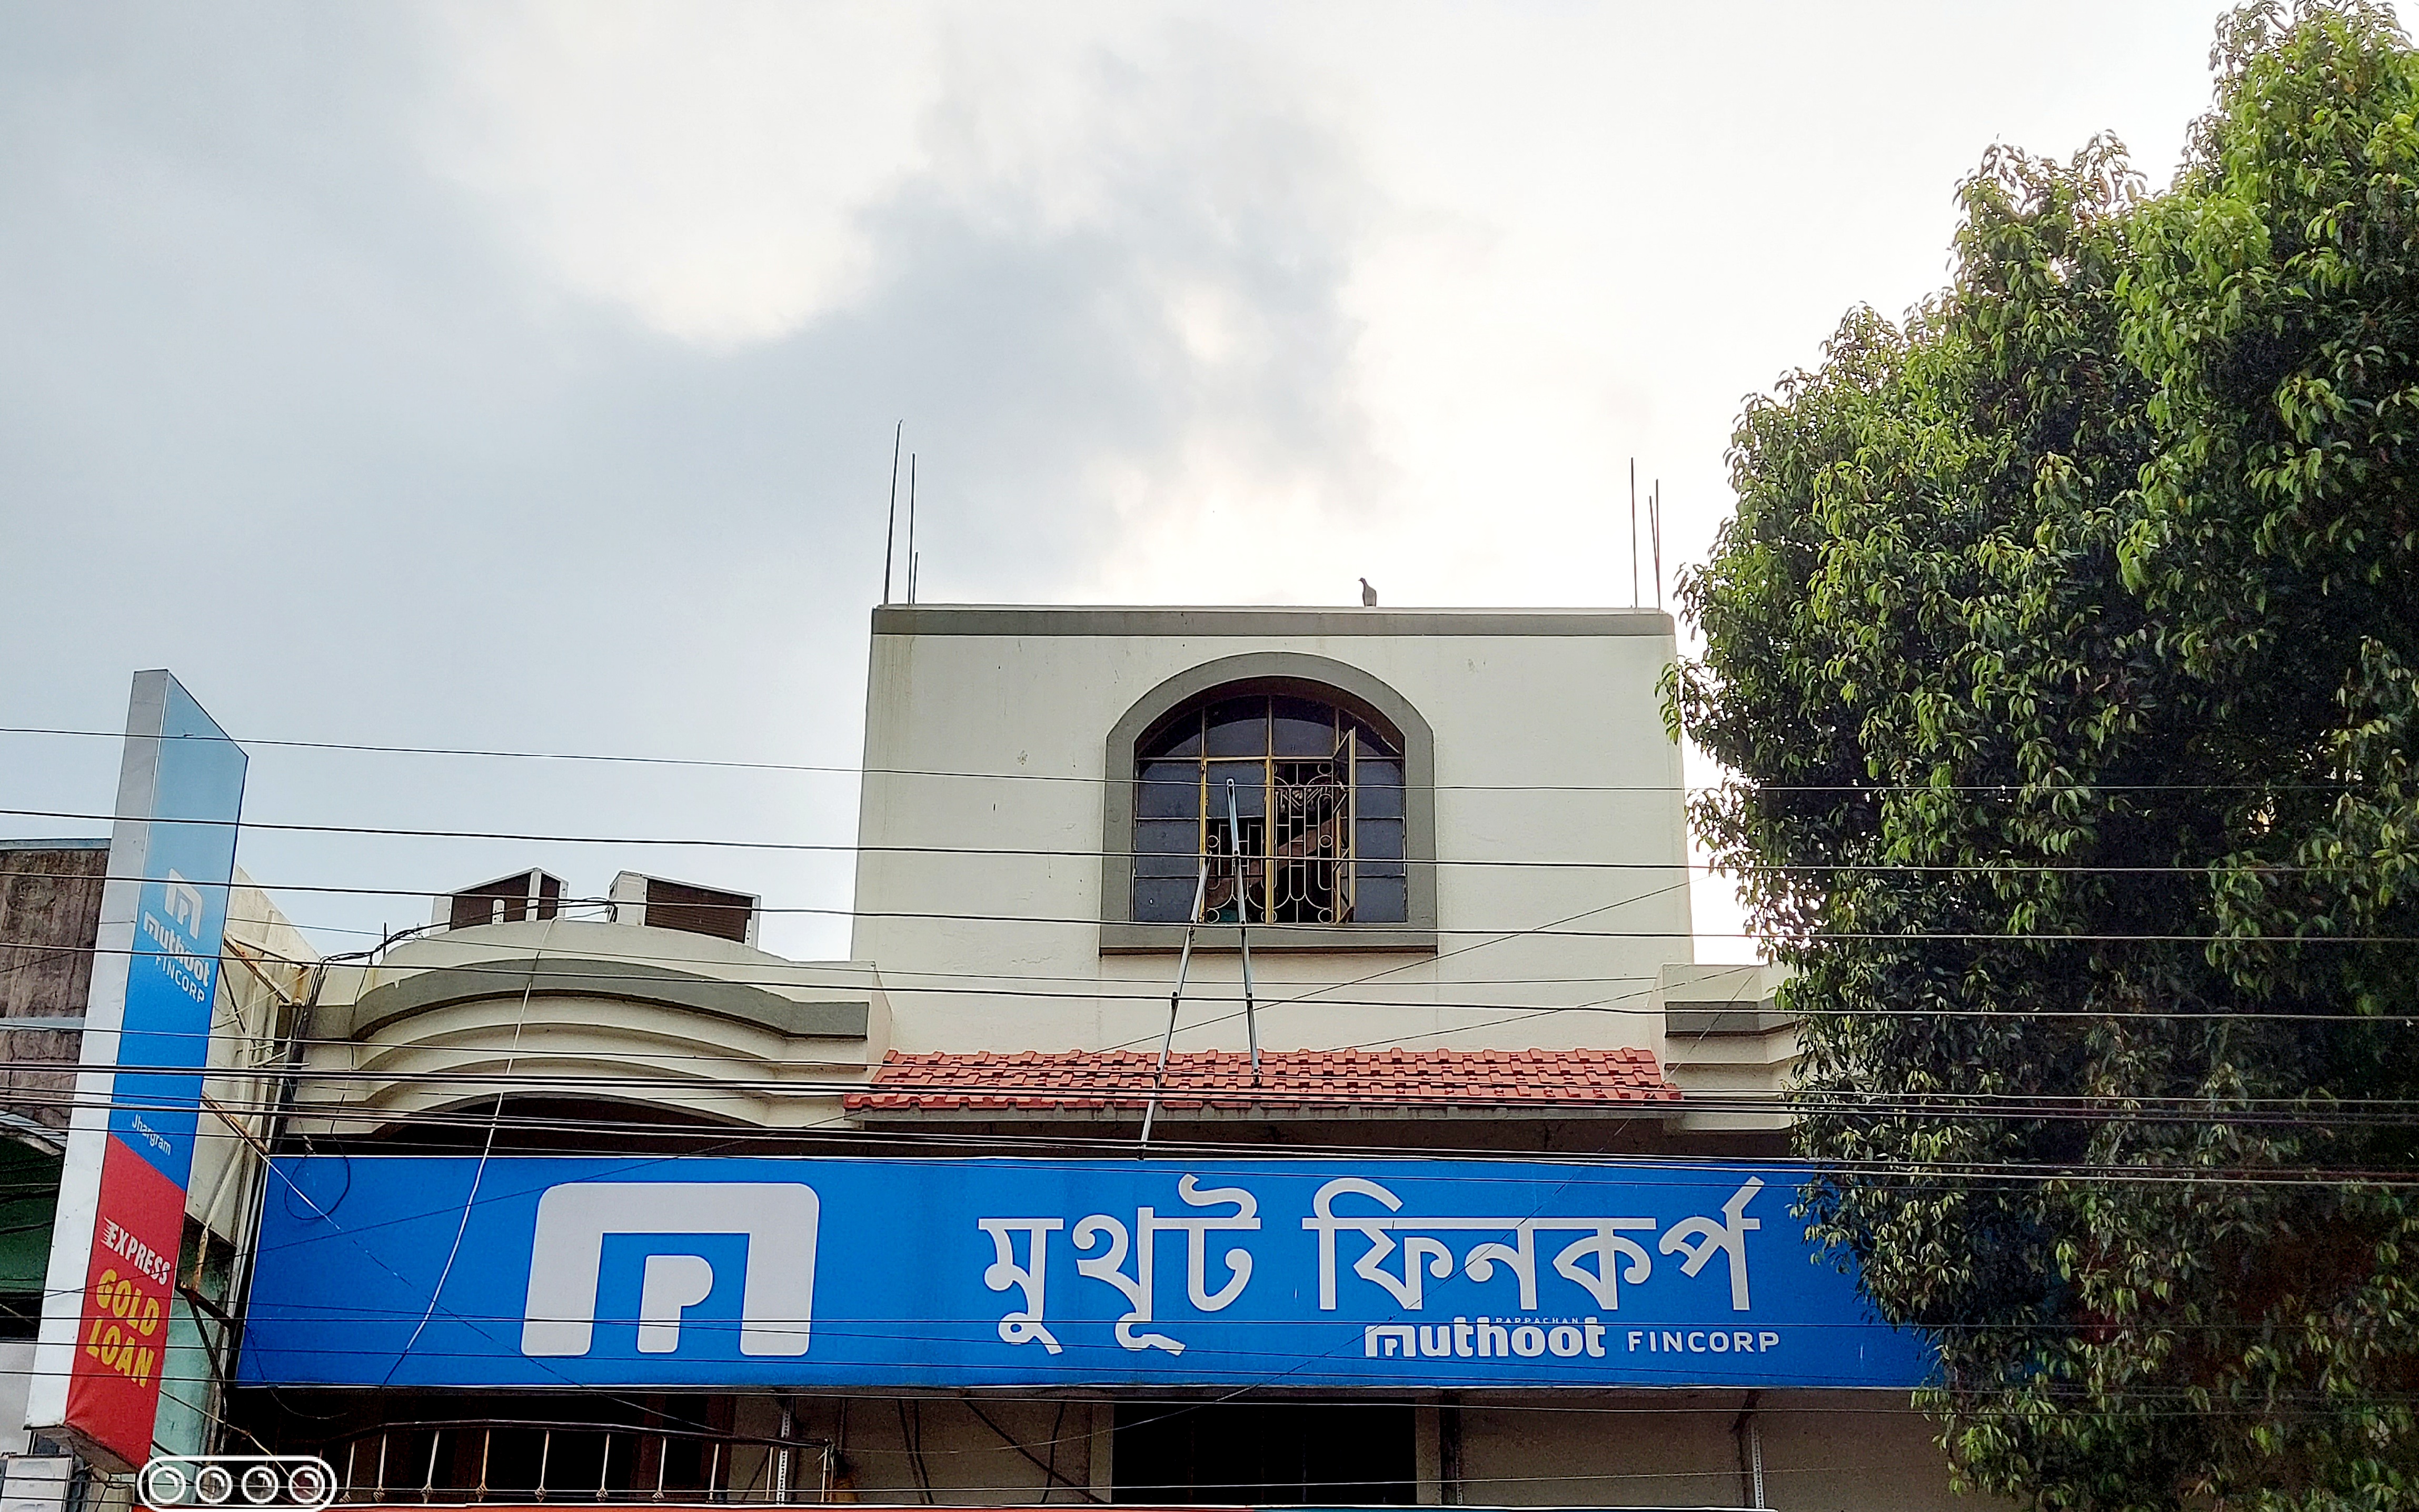 Muthoot Fincorp Gold Loan Services in Main Road, Jhargram, West Bengal